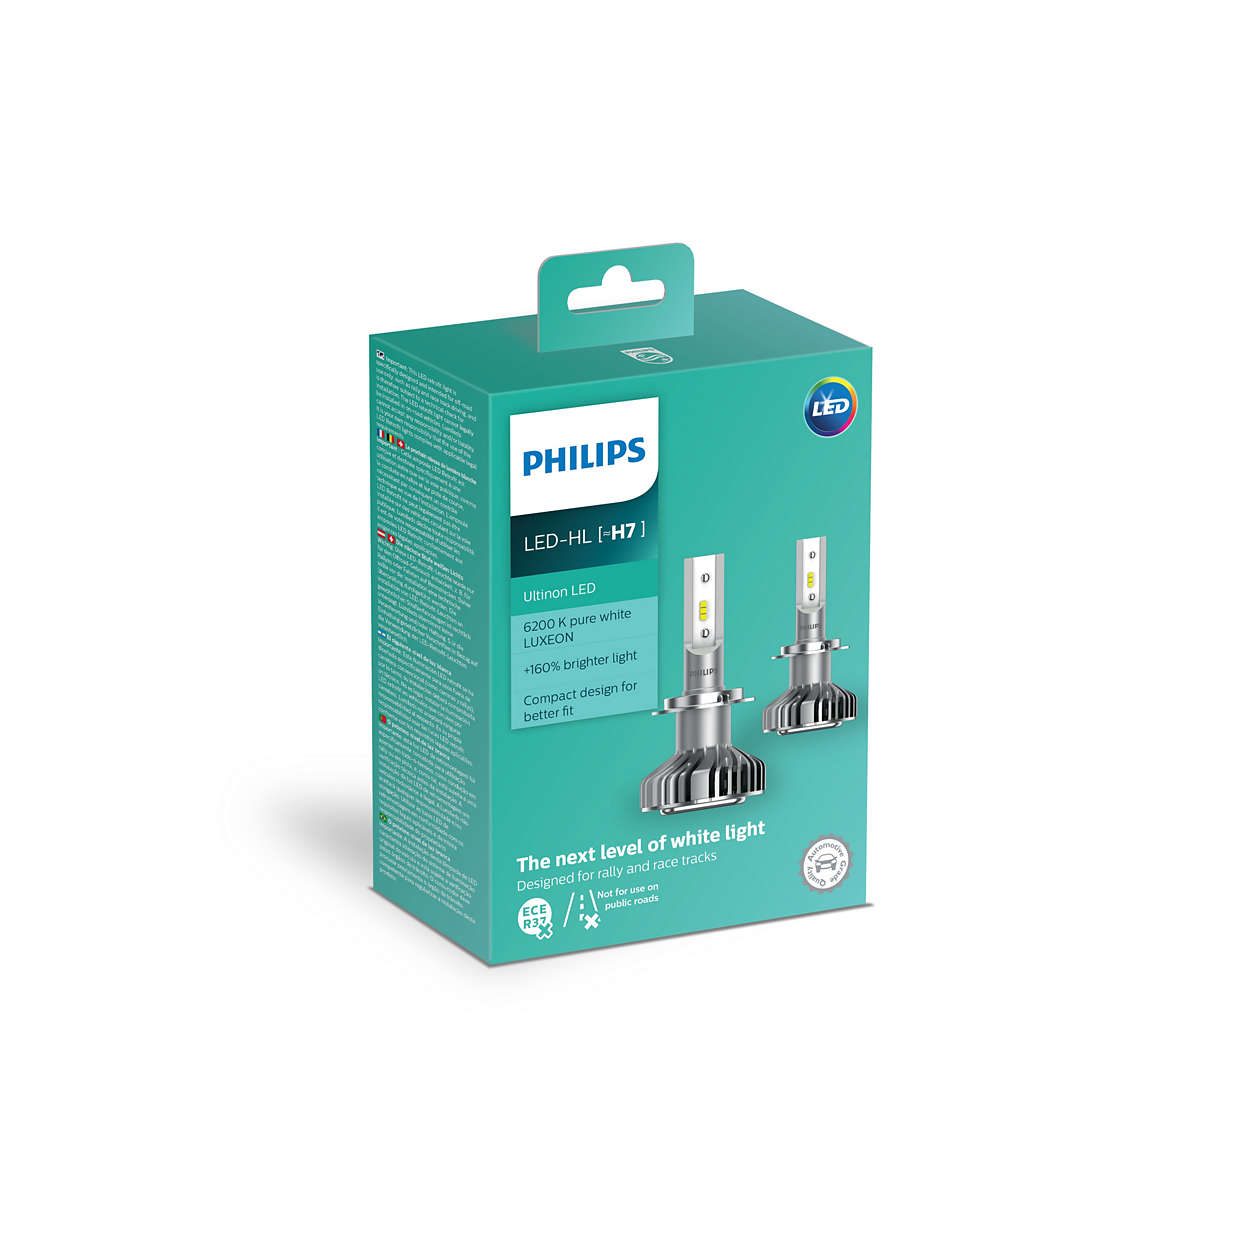 Morgen nøgle salat PHILIPS LED, HID and Halogen bulbs with free Worldwide shipping!